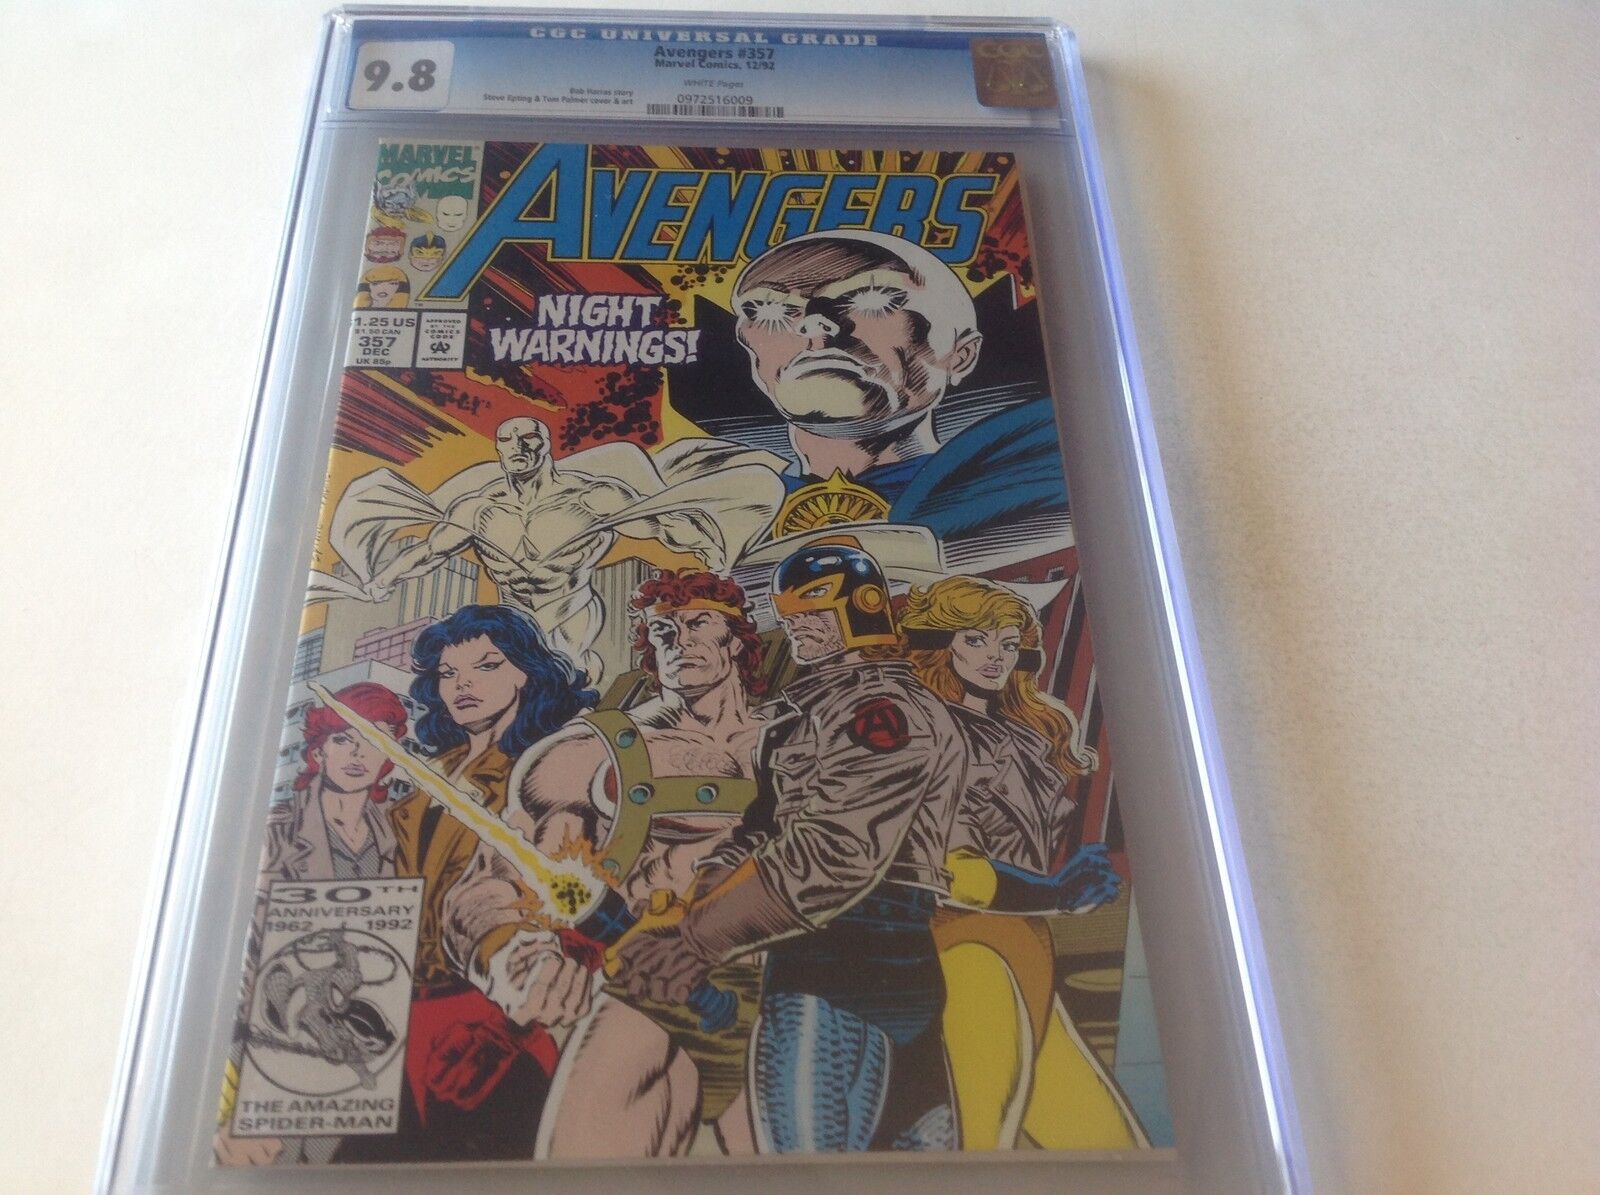 AVENGERS 357 CGC 9.8 WHITE PAGES WATCHER VISION BLACK KNIGHT MARVEL COMICS 1992